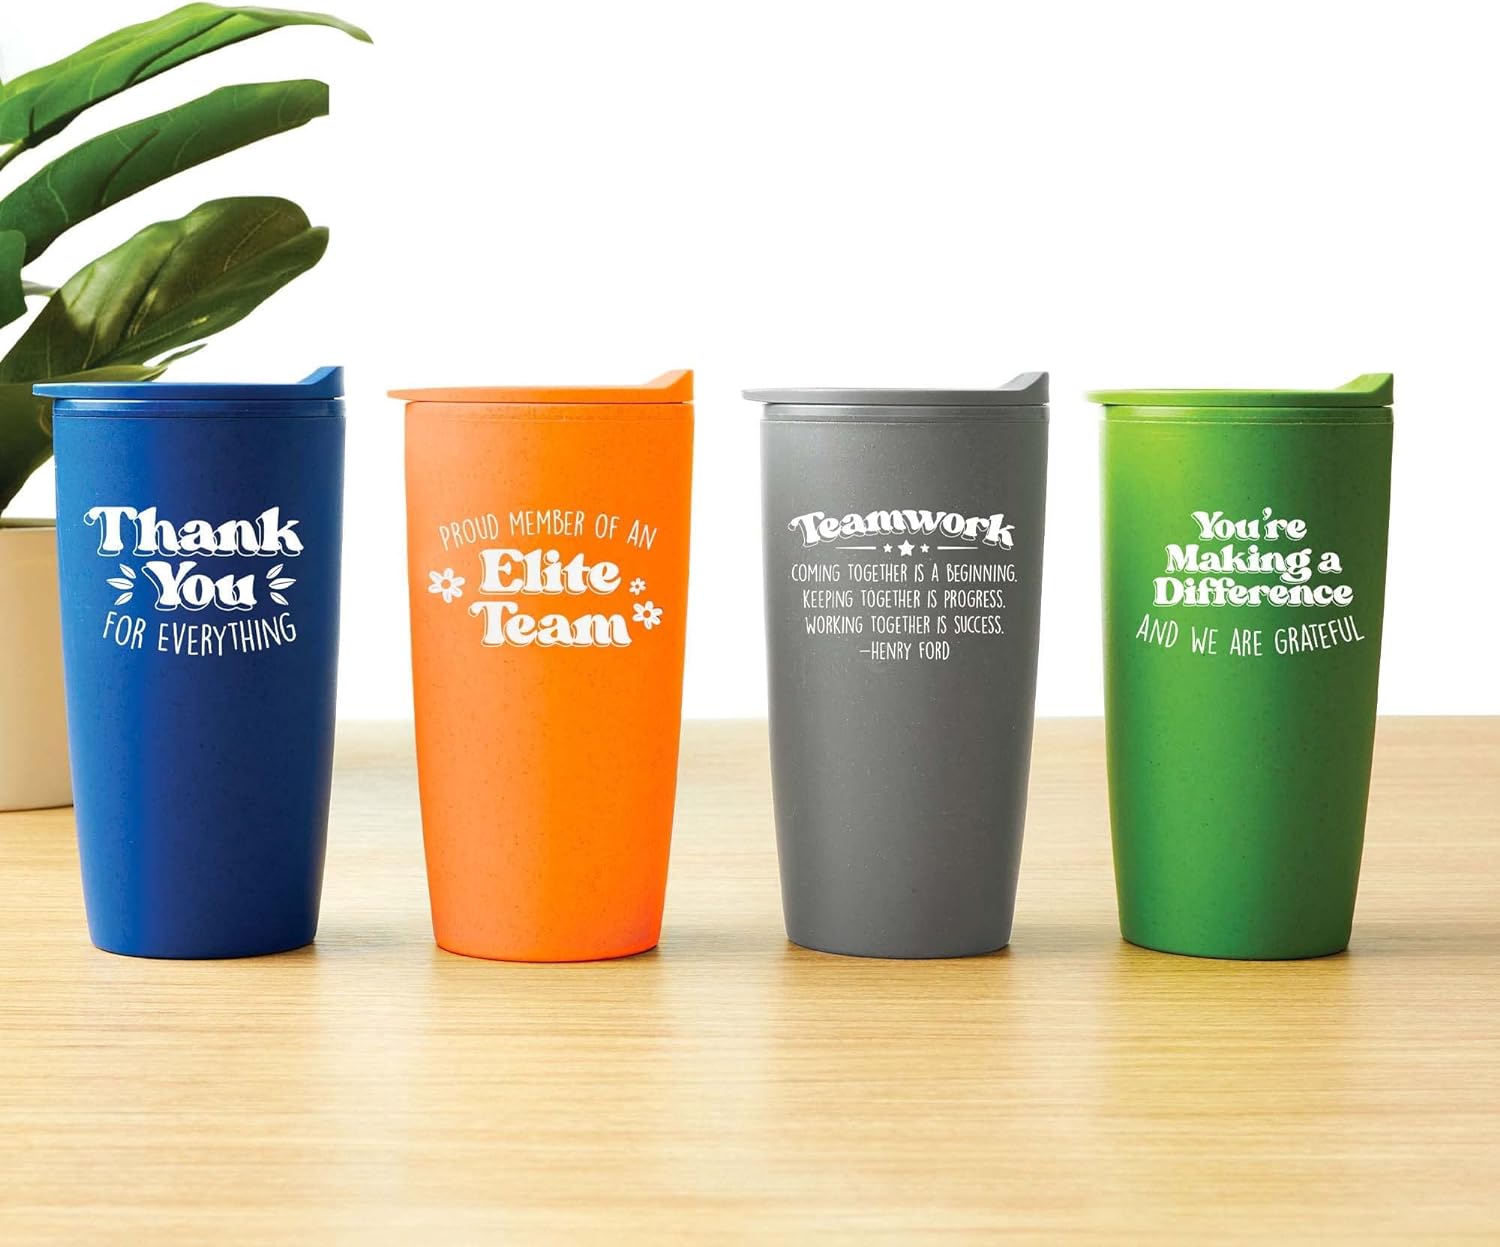 Cheersville Black Wheat Straw Tumblers: Sip Sustainably in Style